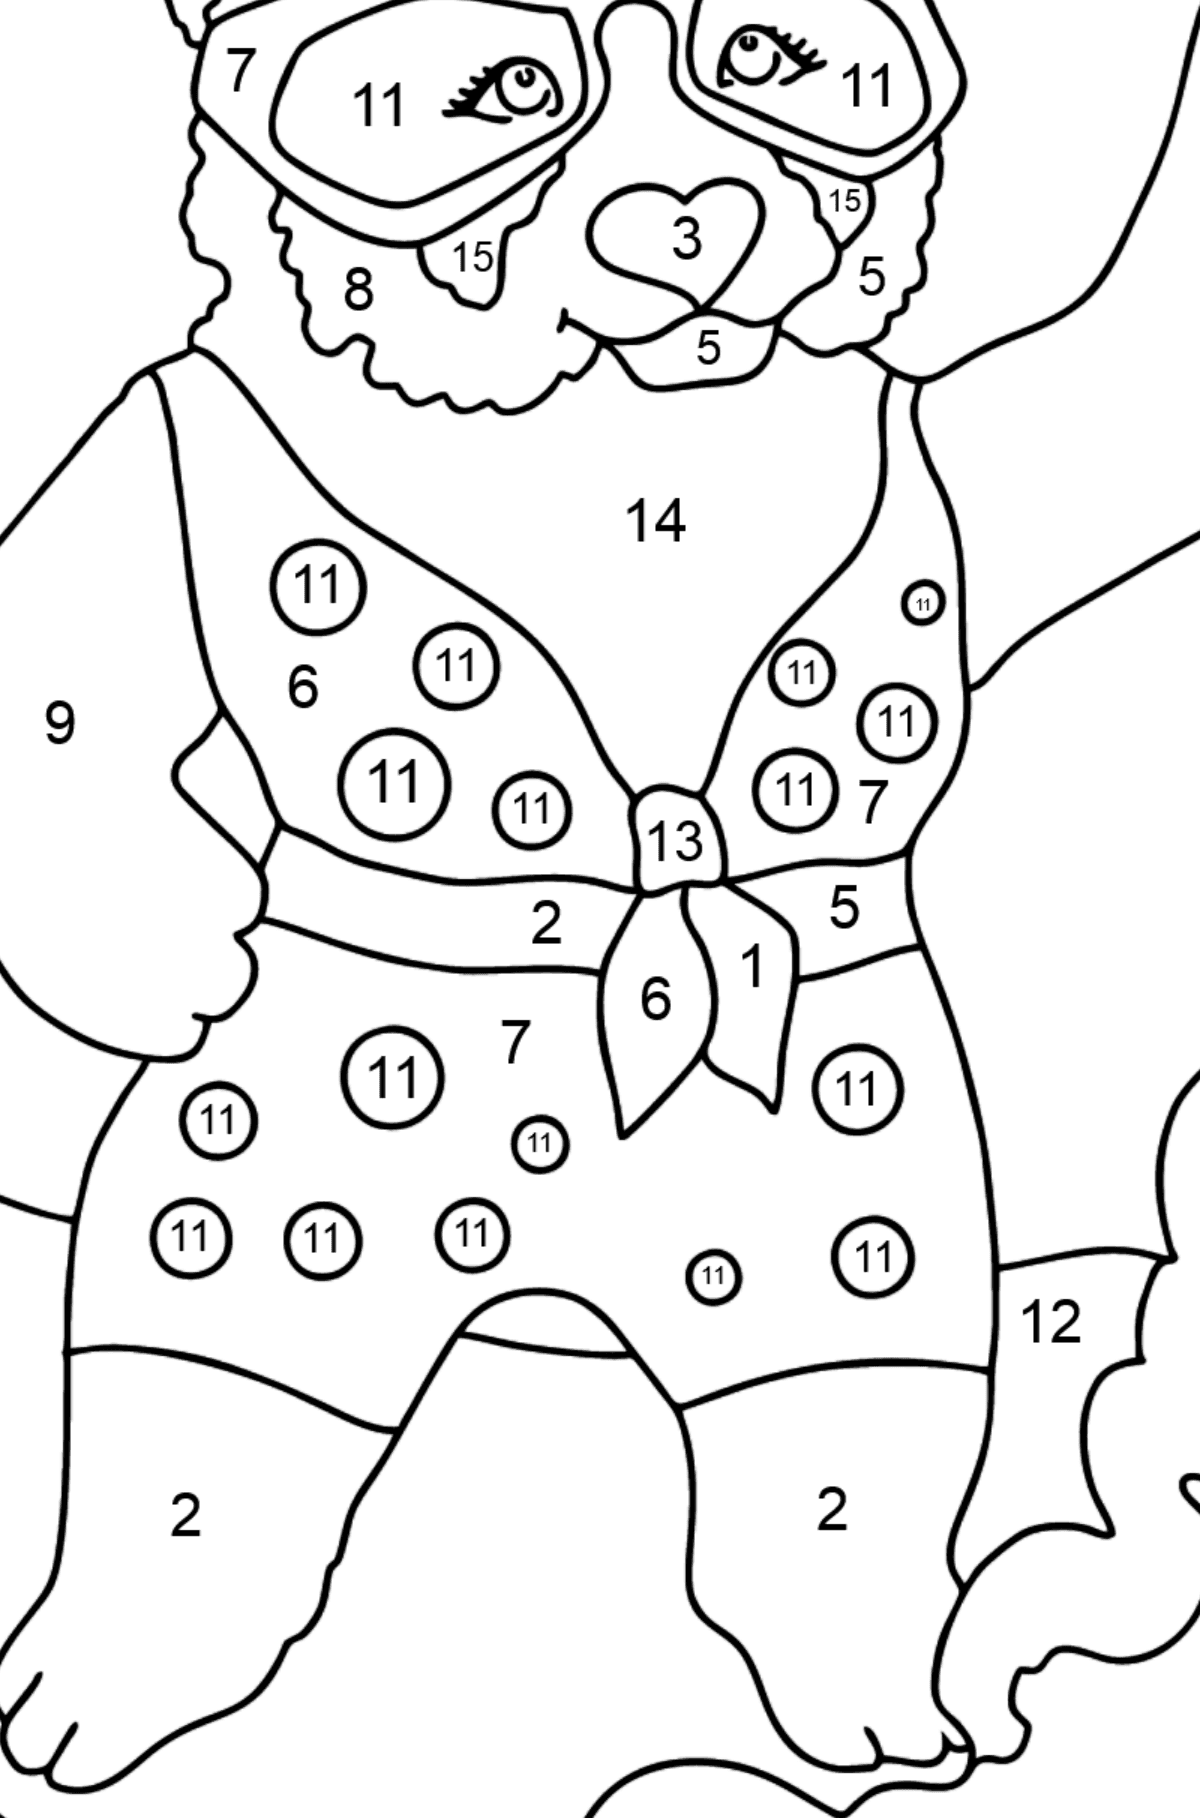 Cartoon Panda (Hard) coloring page - Coloring by Numbers for Kids